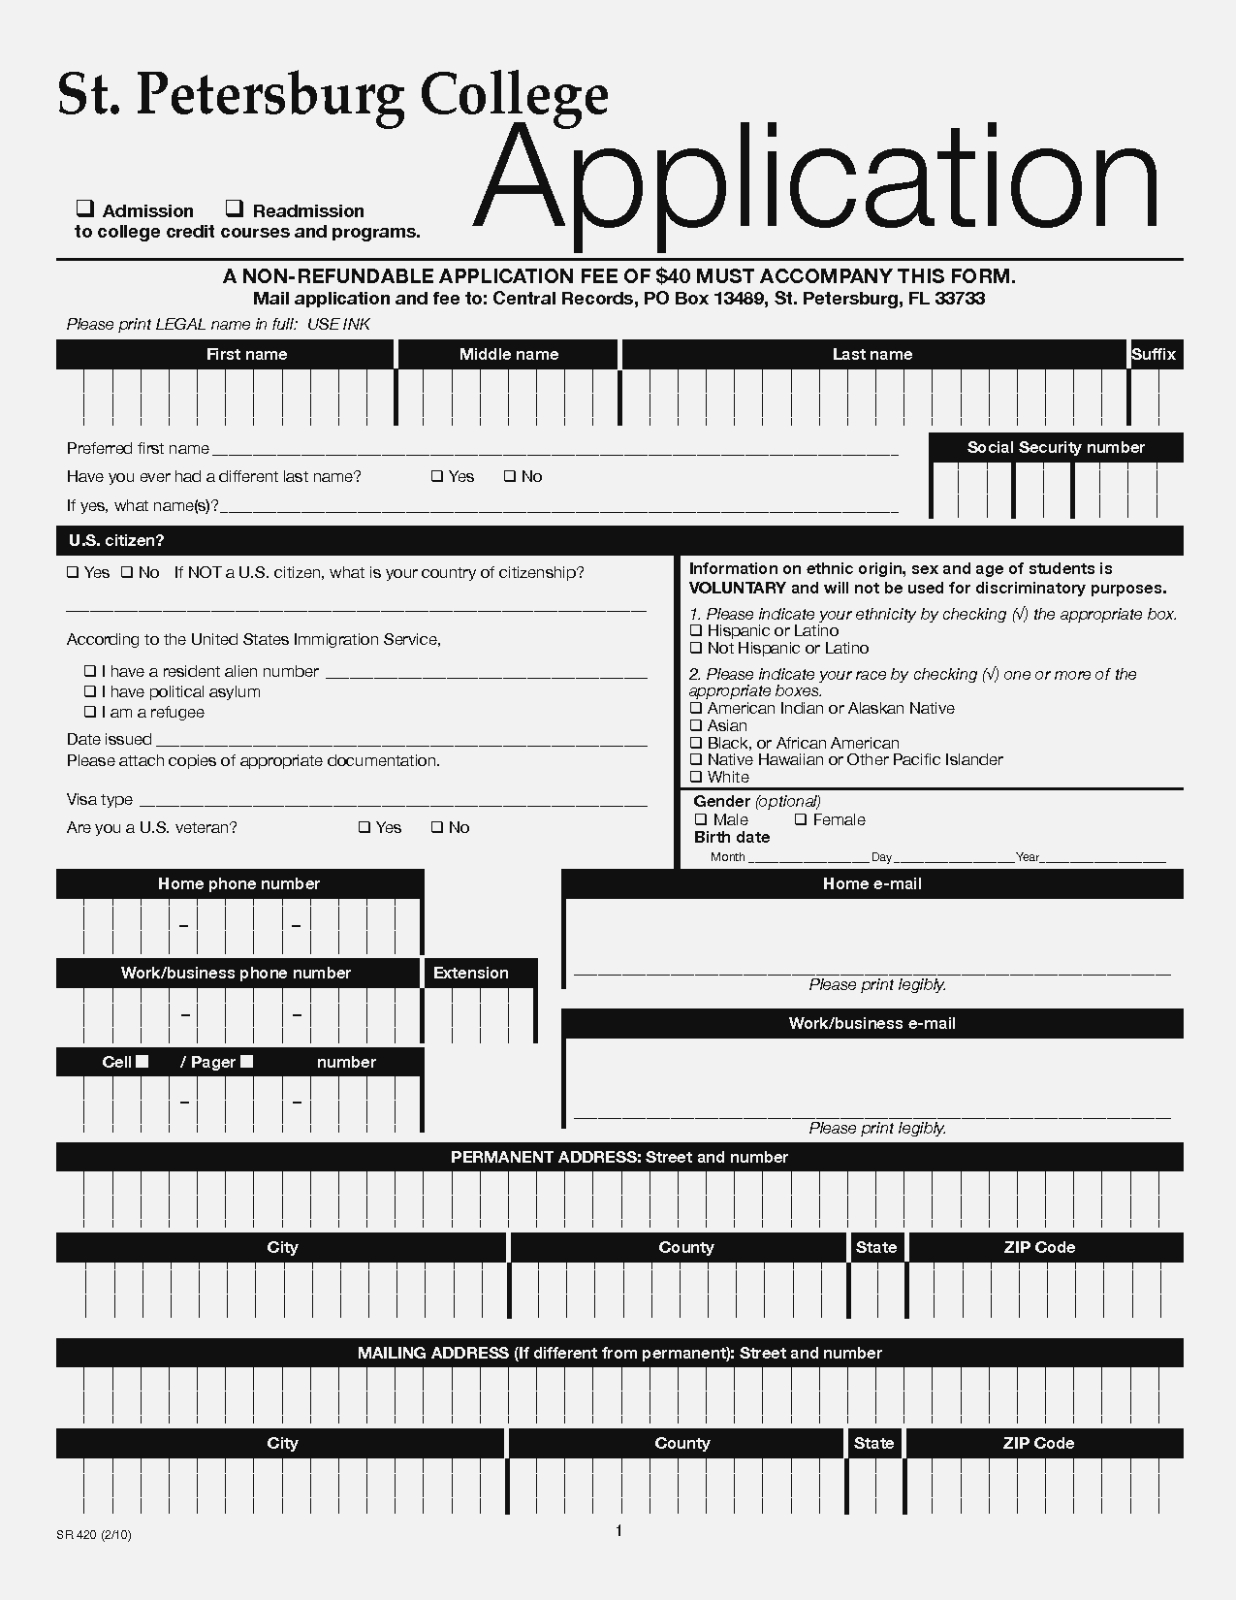 15 Awesome Things You Can | Realty Executives Mi : Invoice And - Free Printable Fafsa Application Form